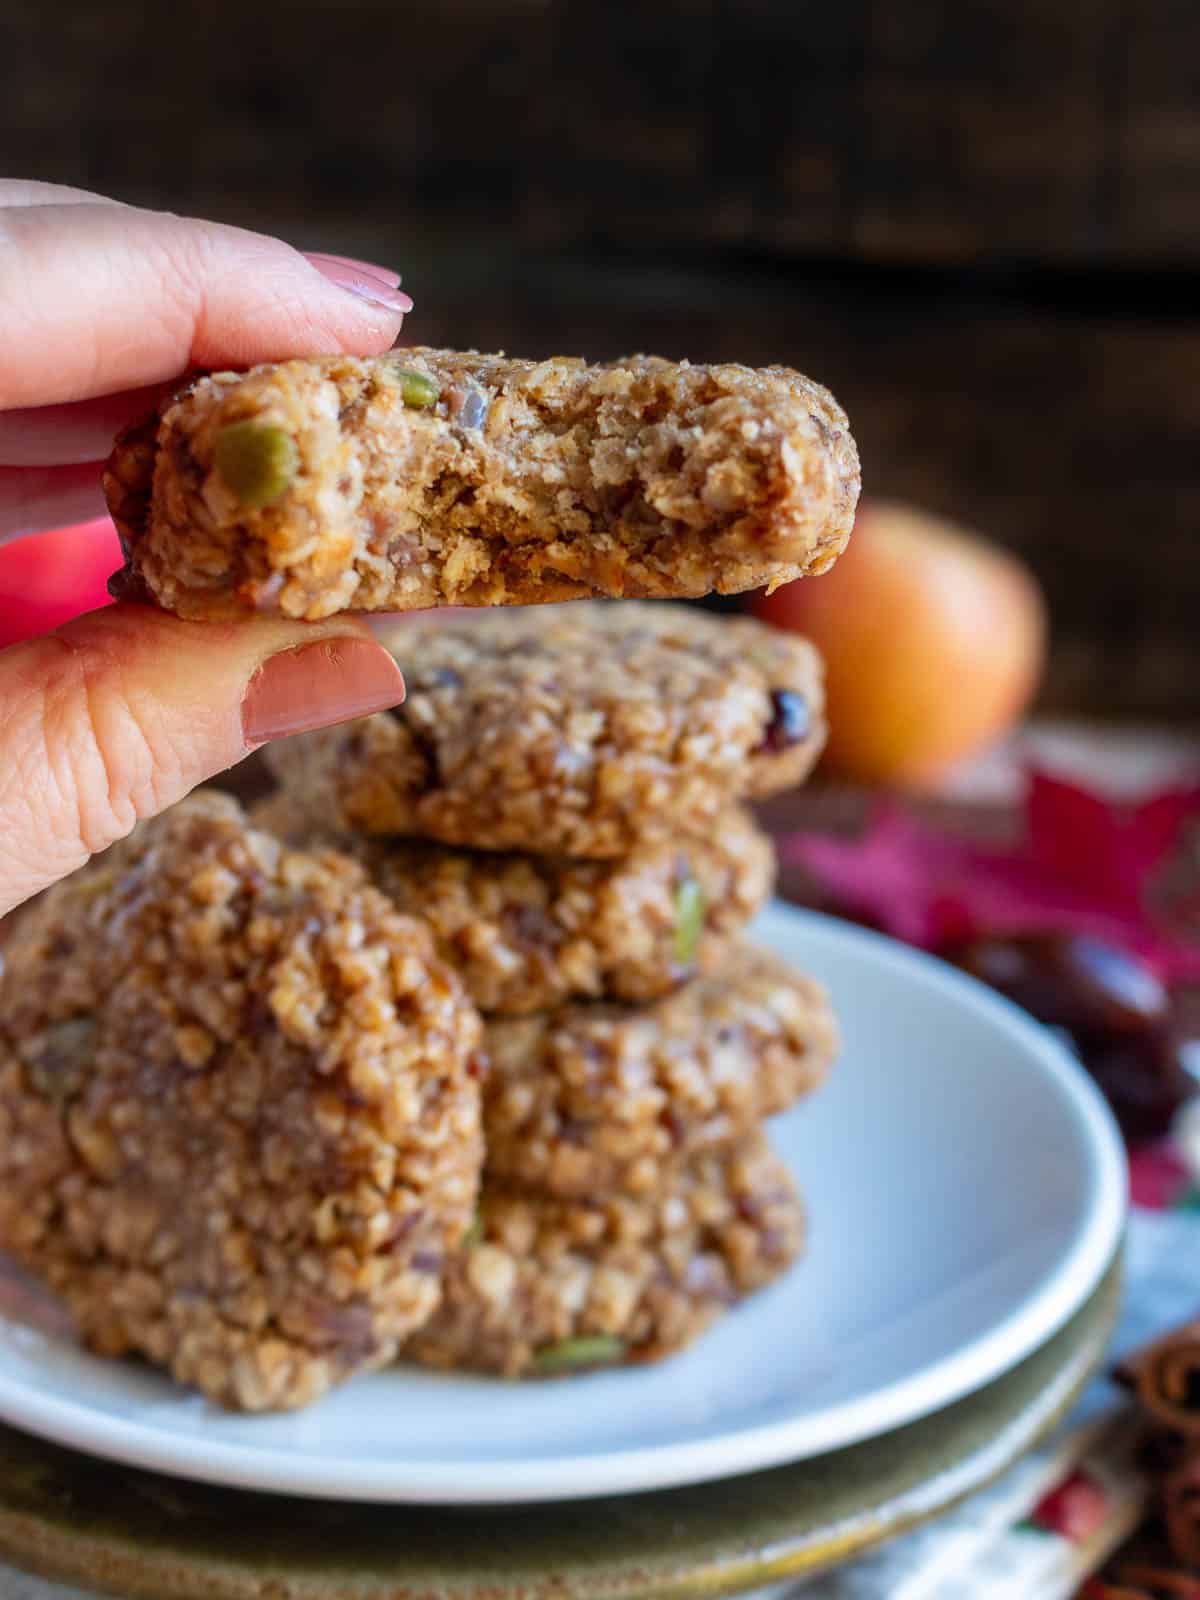 Taking a bite out of a baked chewy apple oatmeal date cookie.